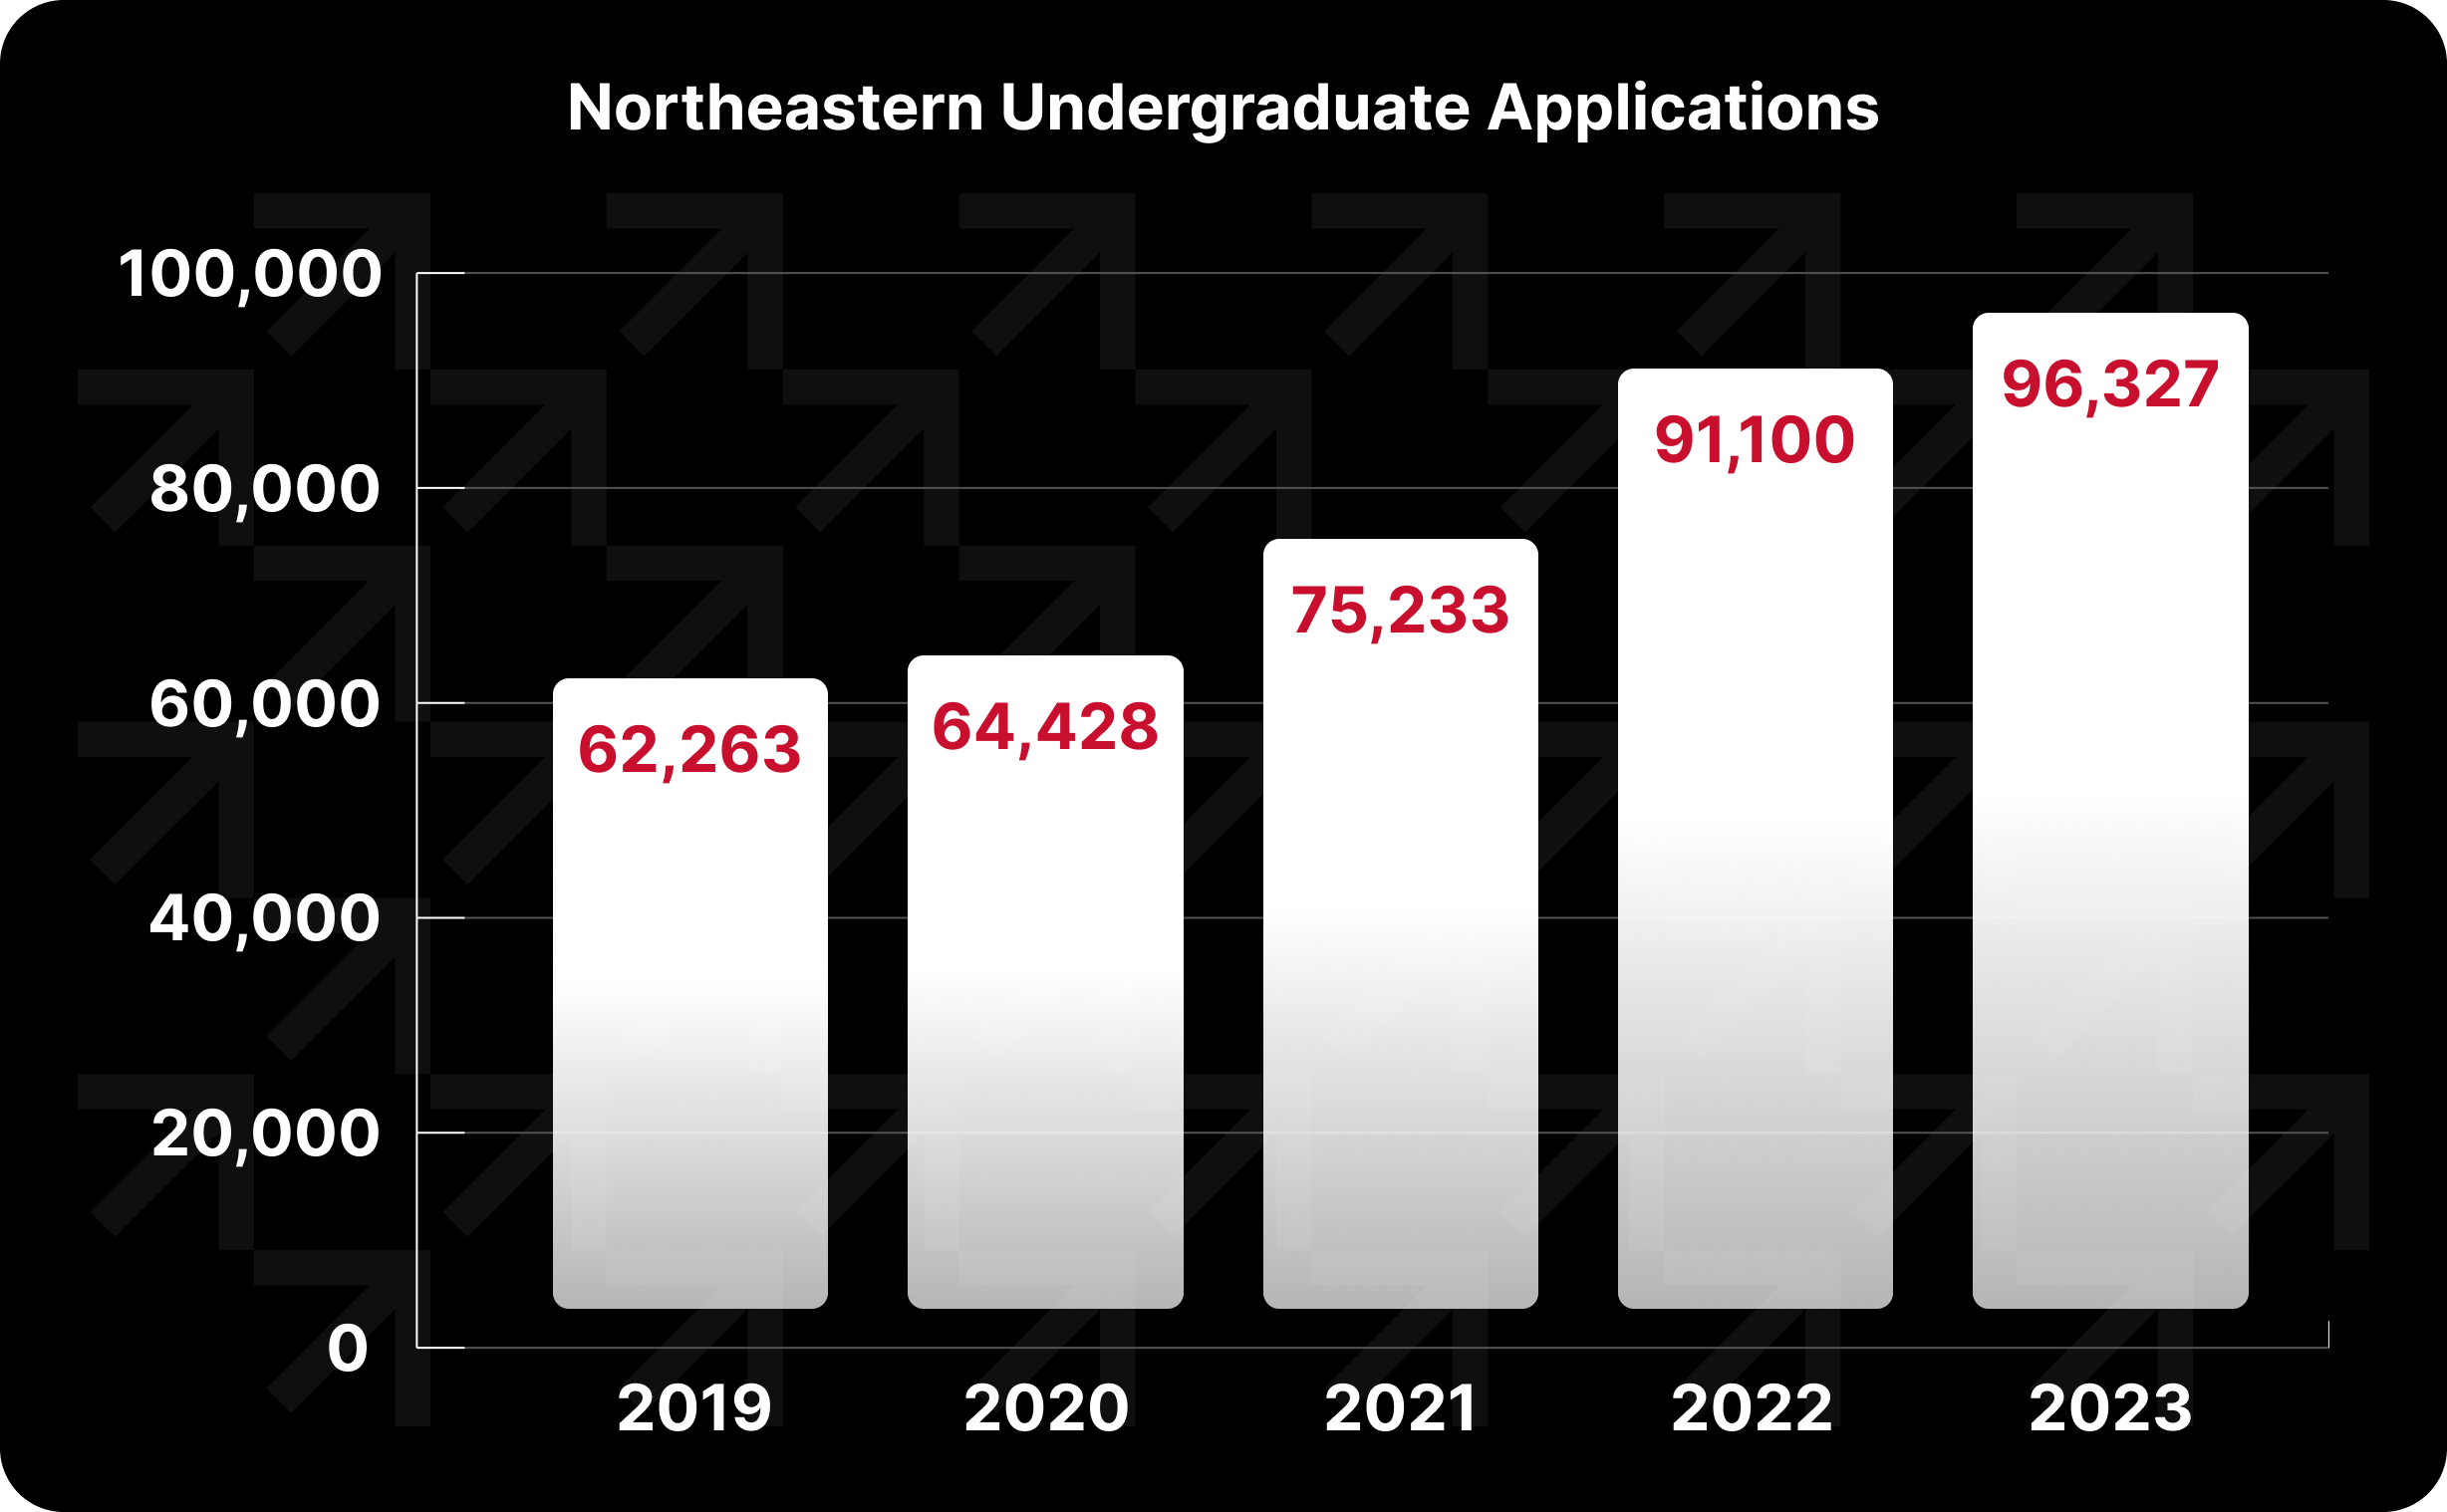 Bar graph depicting the rise in Northeastern undergraduate applications over five years. There were 62,263 applicants for 2019, 64,428 for 2020, 75,233 for 2021, 91,100 for 2022, and 96,327 for 2023.